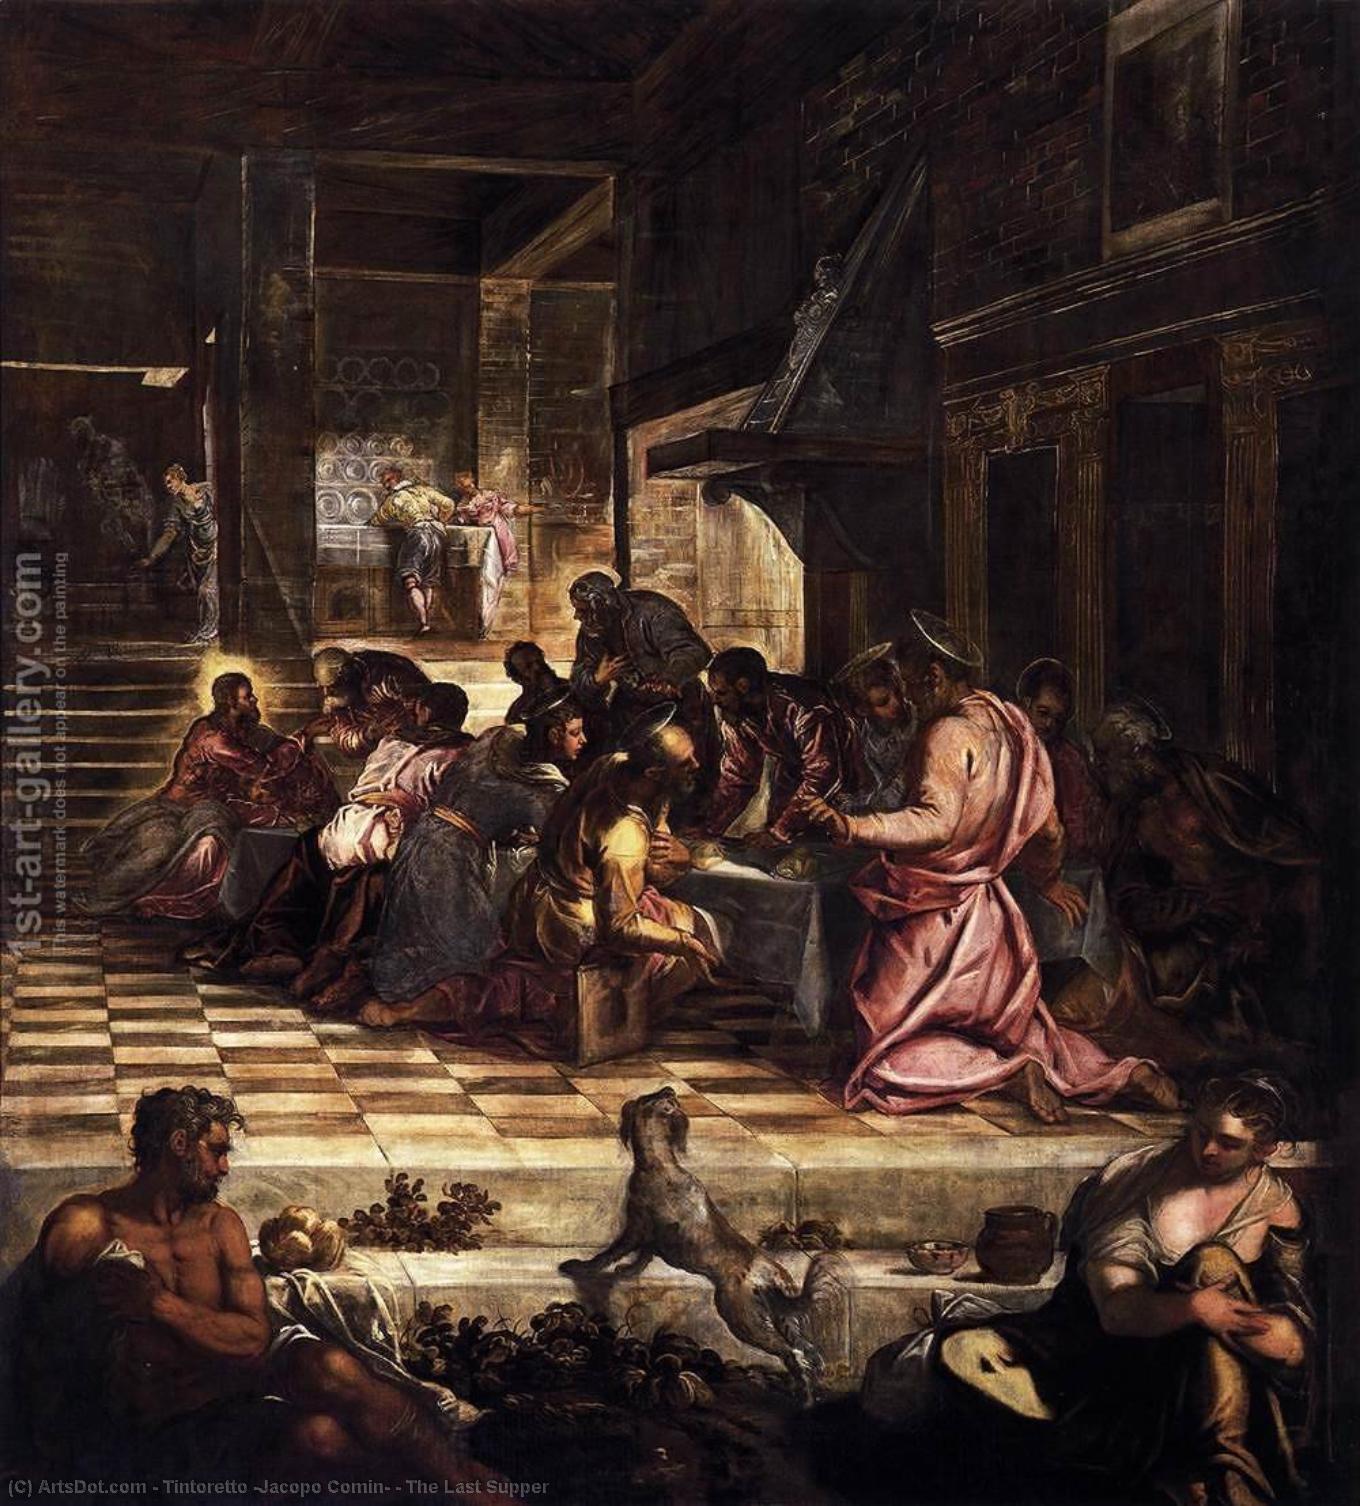 WikiOO.org - Encyclopedia of Fine Arts - Lukisan, Artwork Tintoretto (Jacopo Comin) - The Last Supper